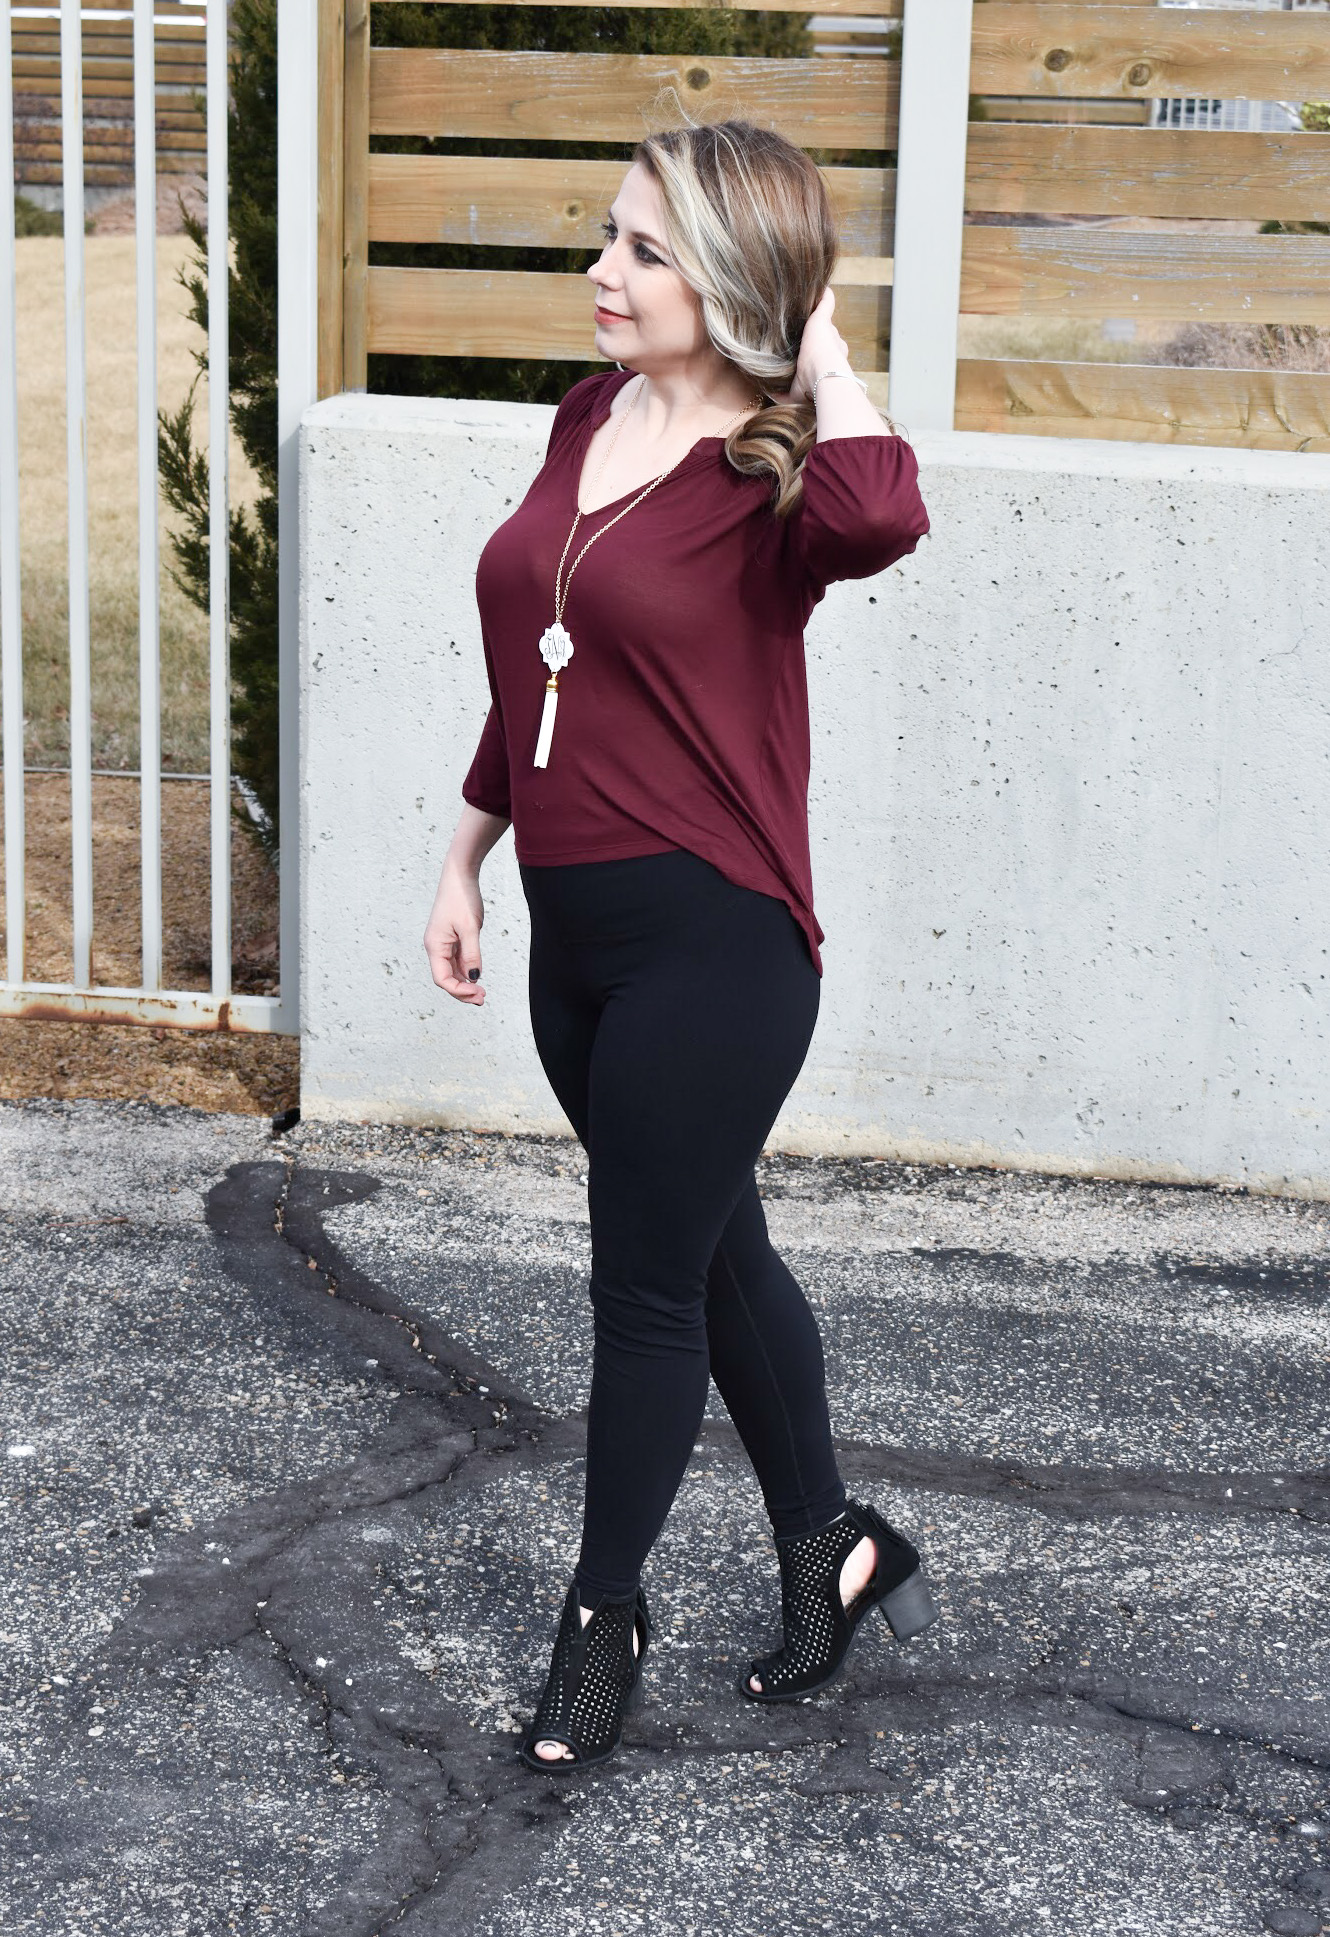 Ankle Boots Leggings Outfits: Over 16 Royalty-Free Licensable